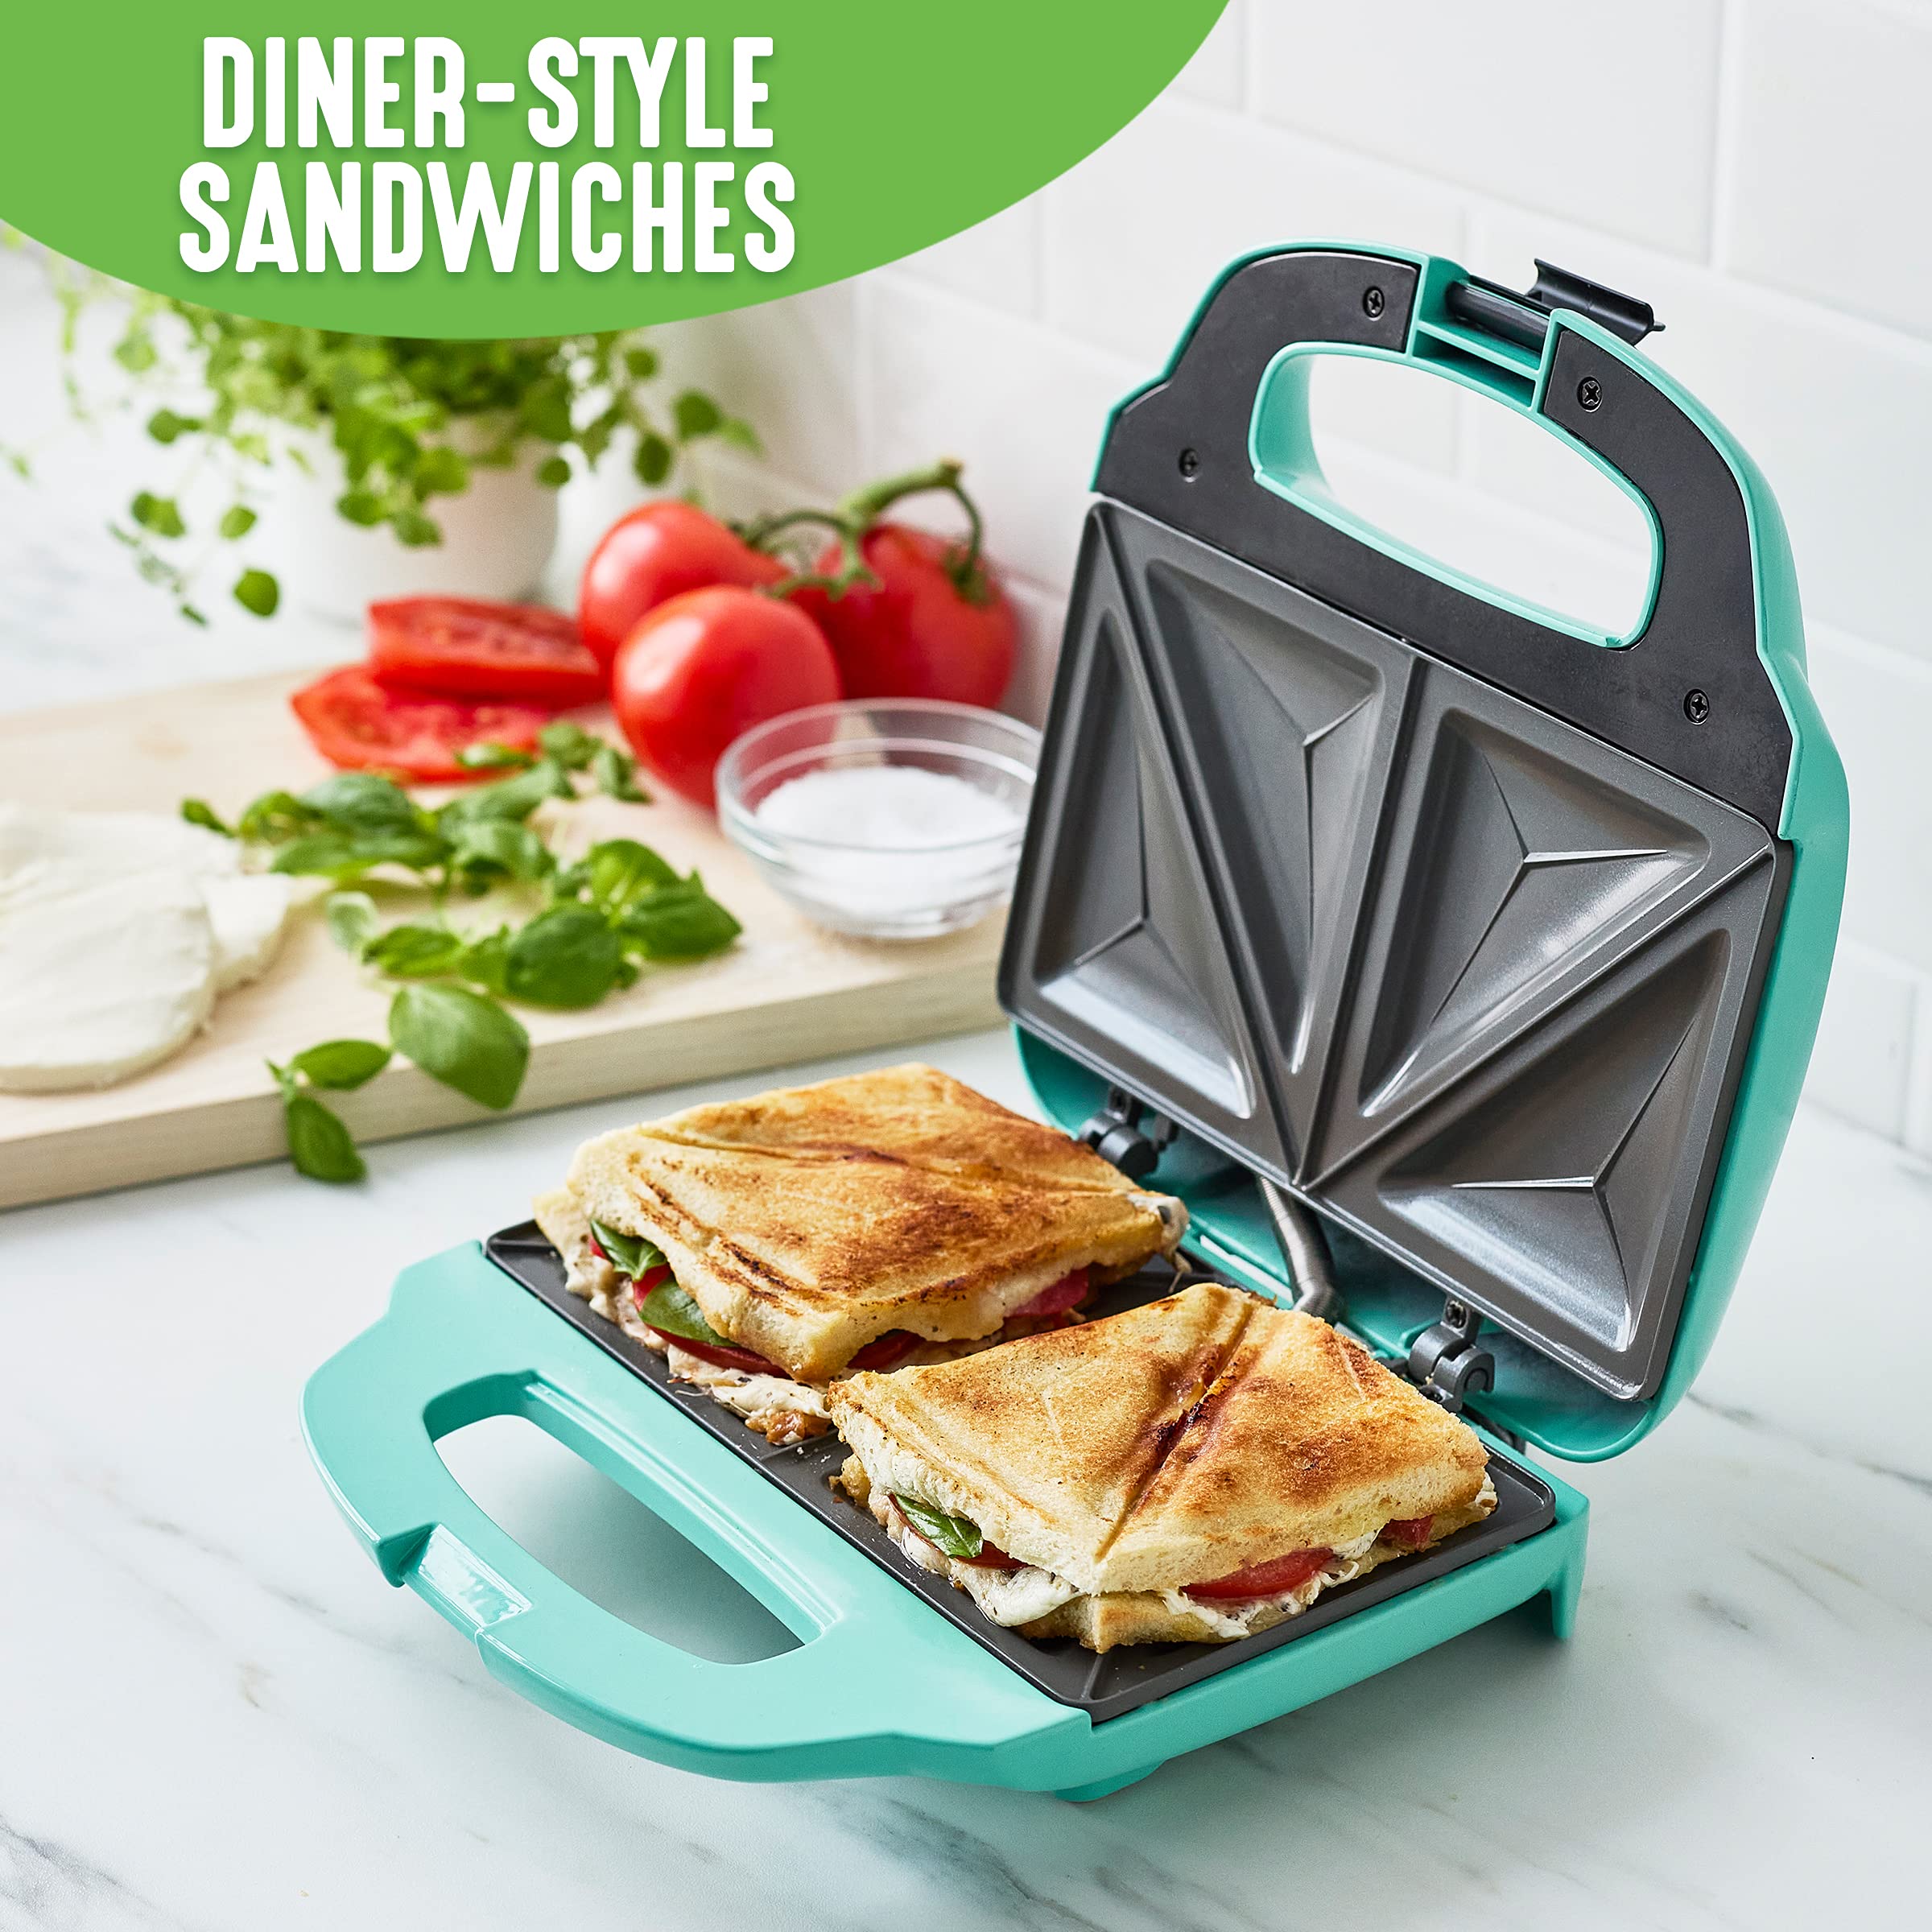 GreenLife Pro Electric Panini Press Grill and Sandwich Maker, Healthy Ceramic Nonstick Plates, Easy Indicator Light, PFAS-Free, Turquoise